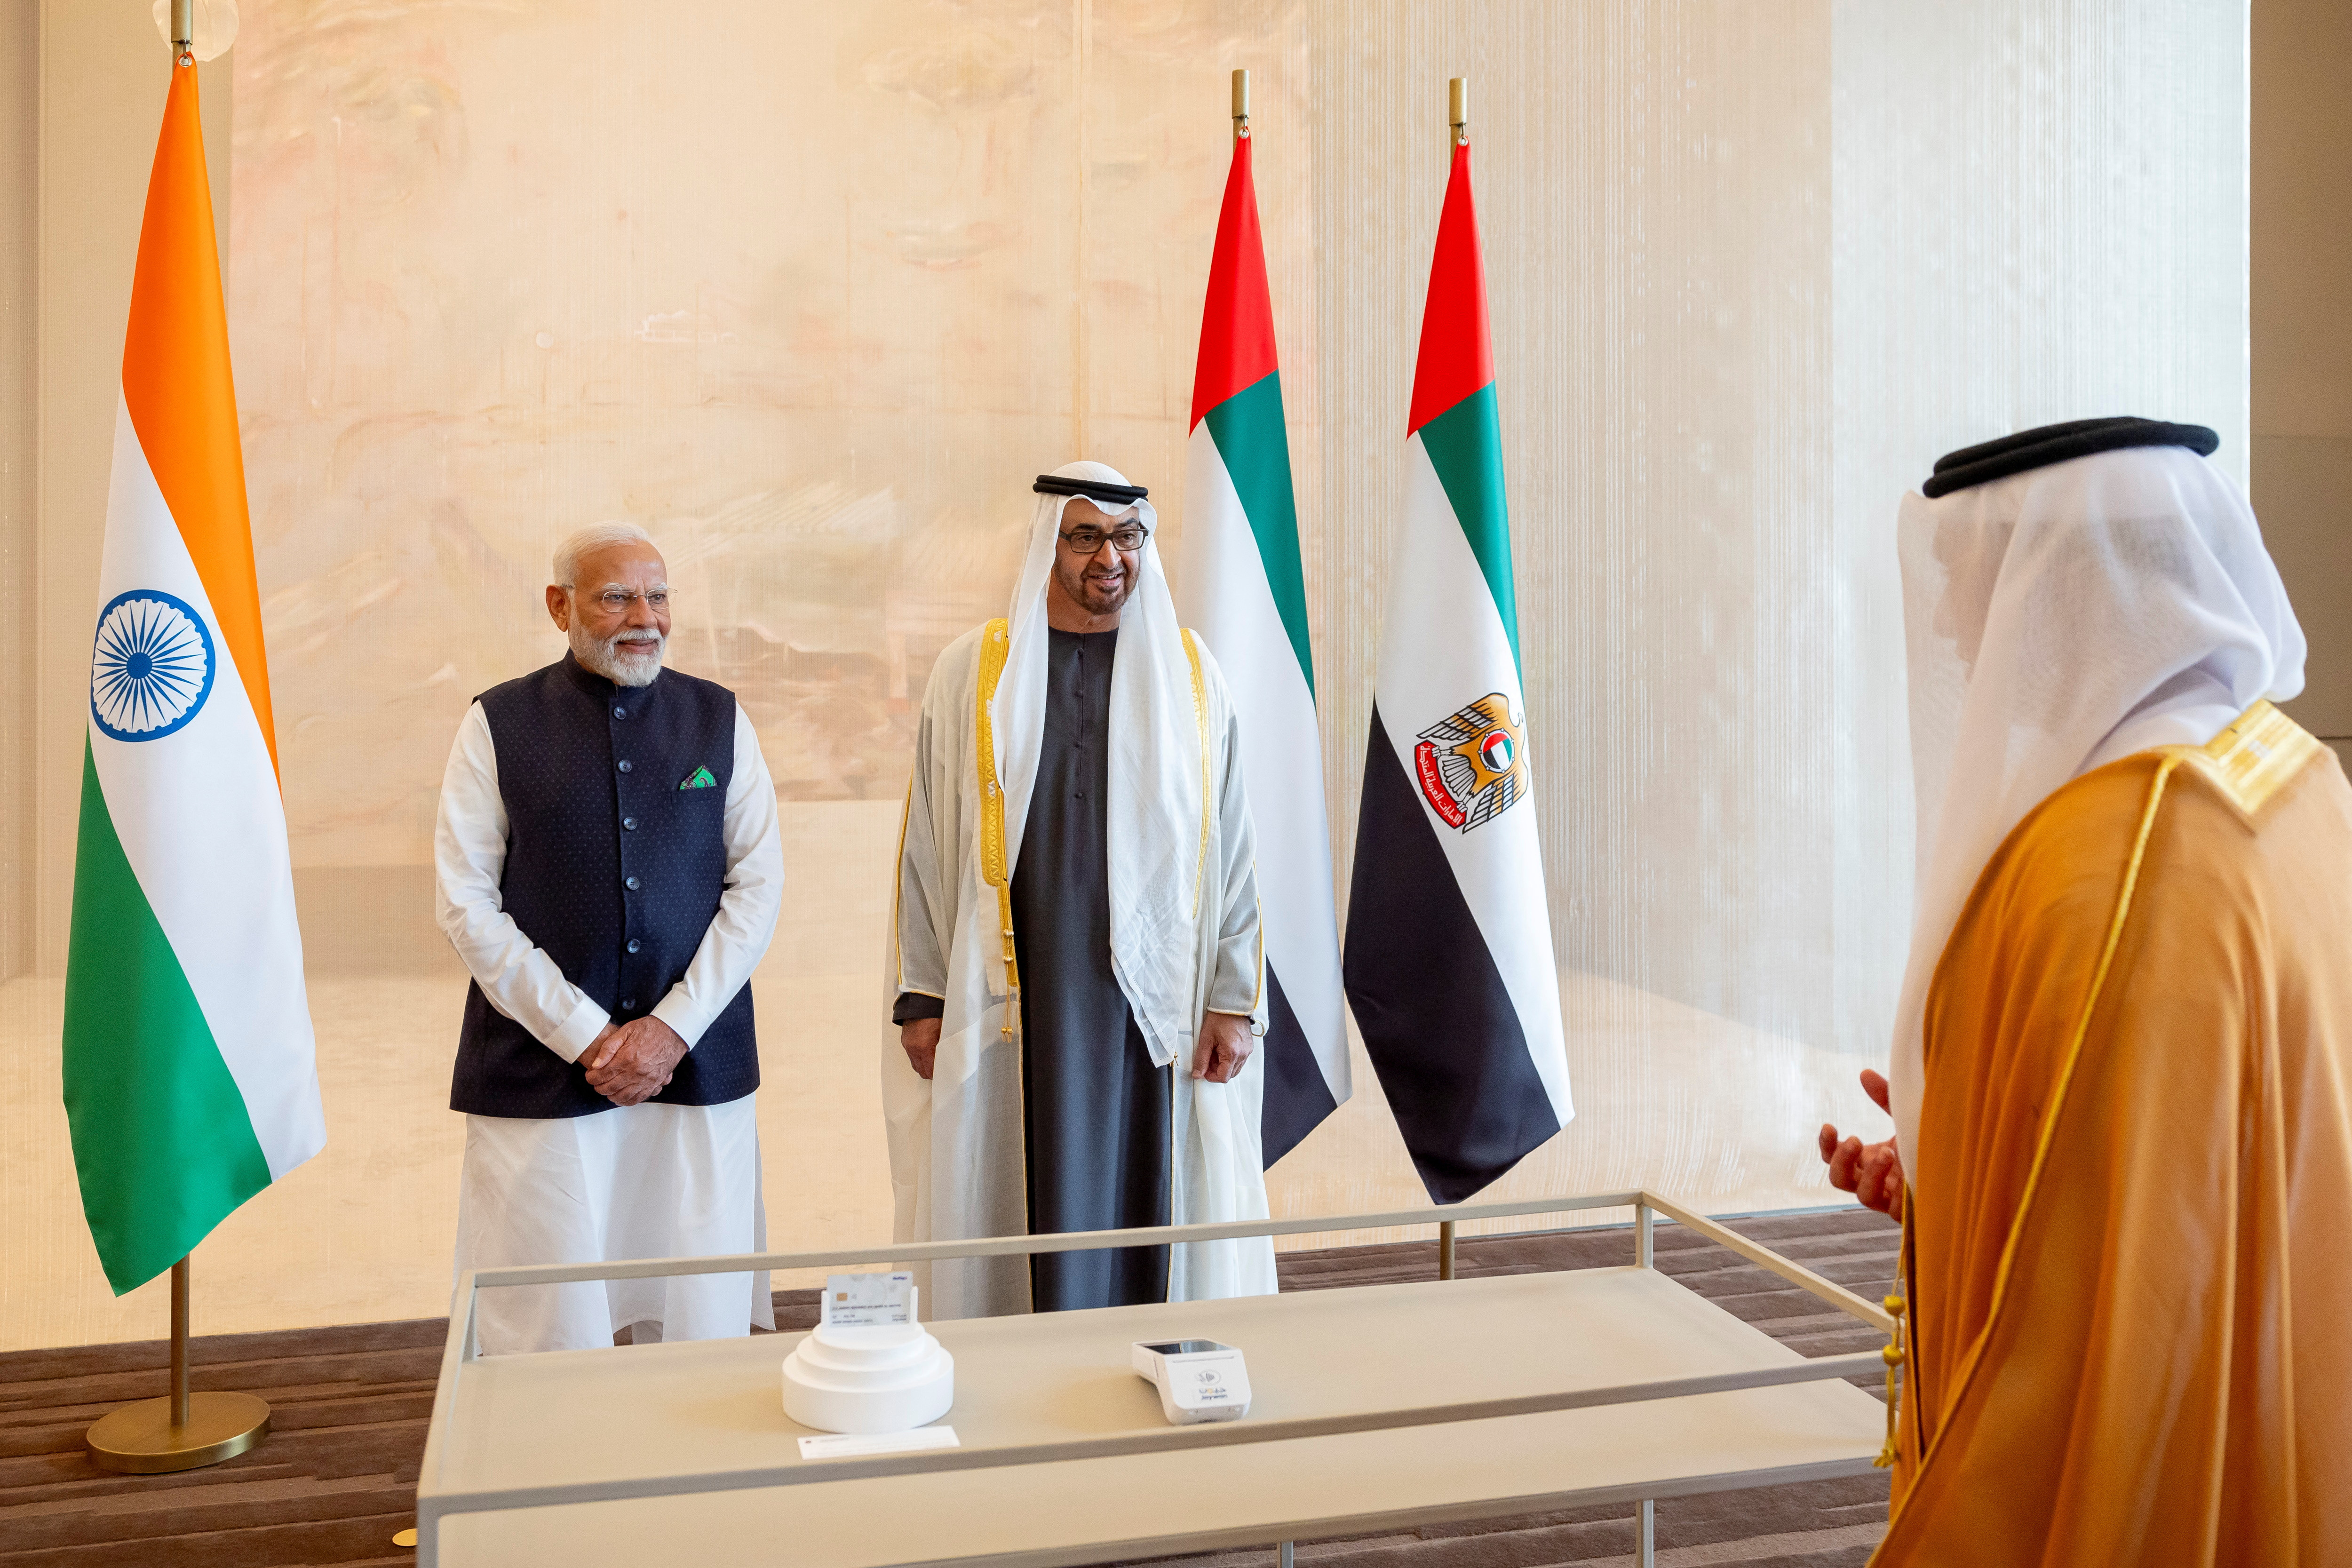 India, UAE sign pact on trans-continental trade corridor | Reuters